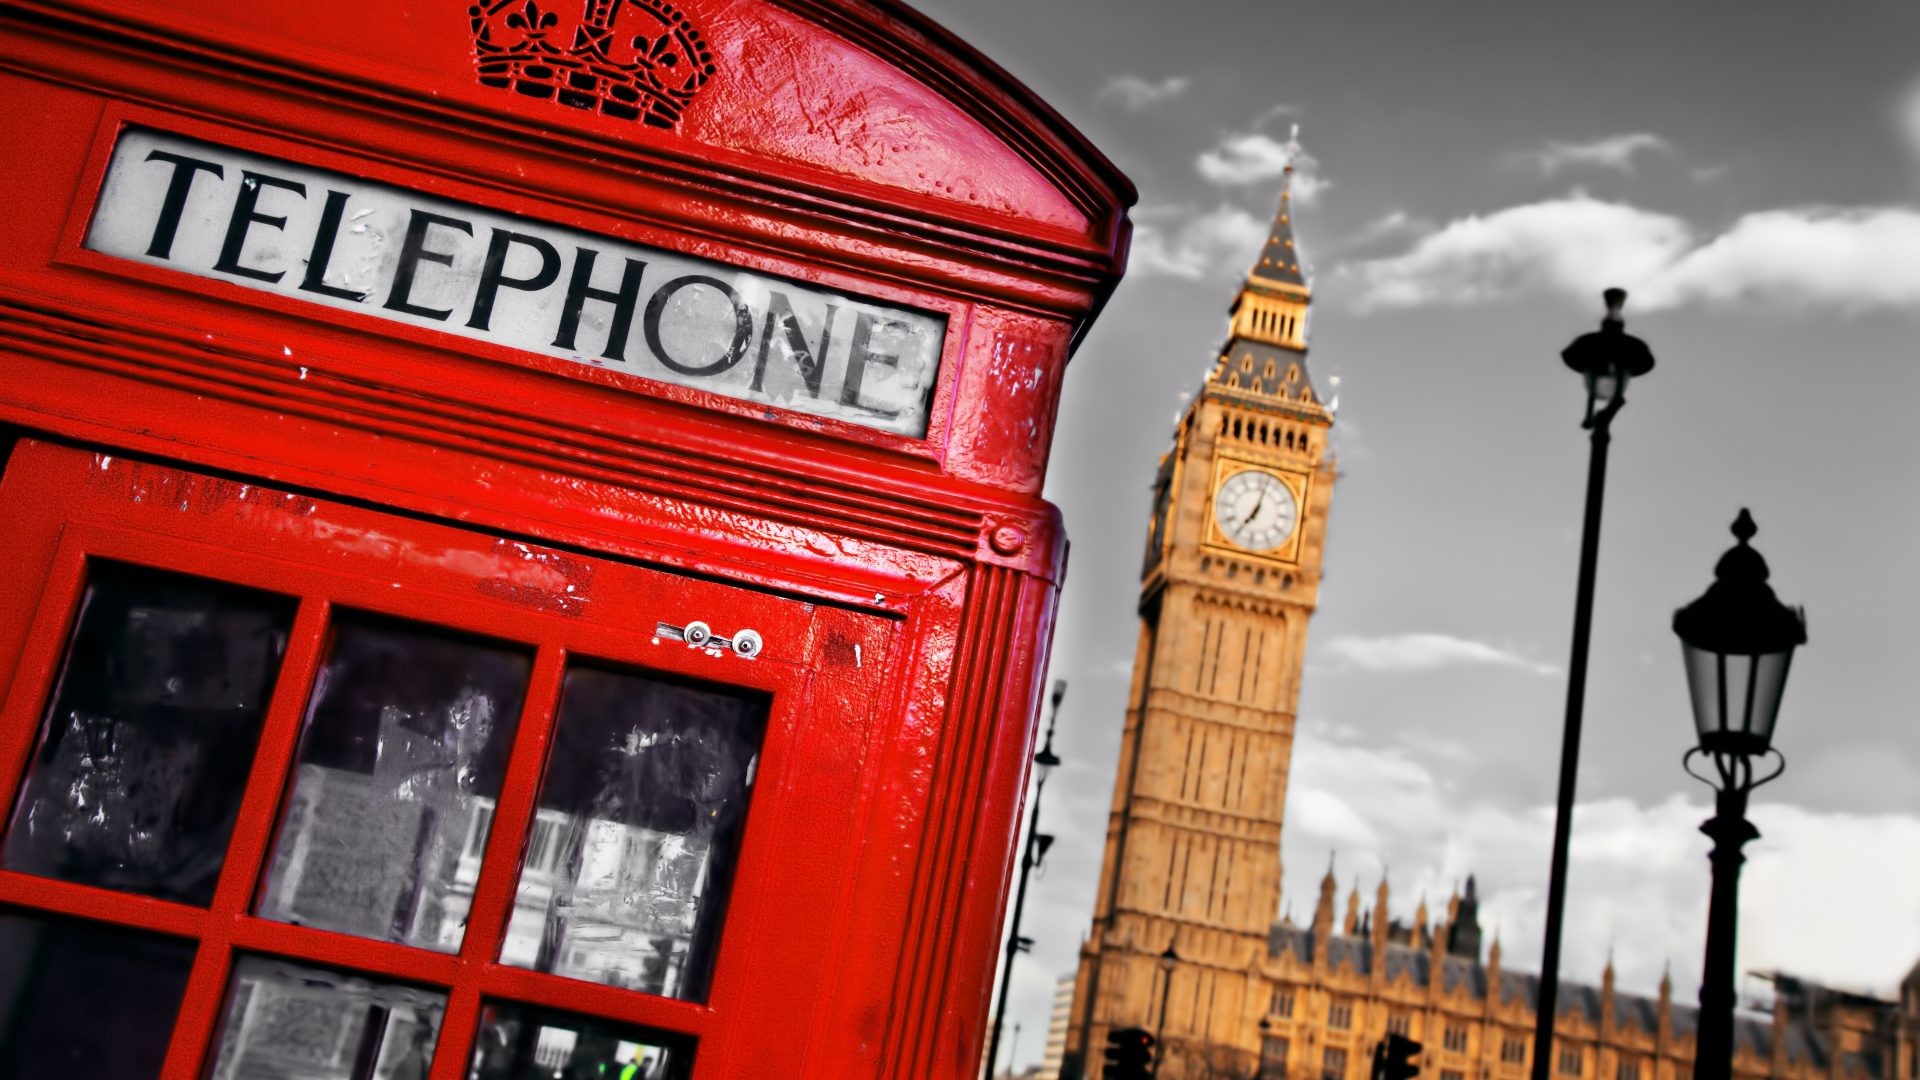 1920x1080 Other - London City Telephone Big Ben England Gallery for HD 16:9 High  Definition